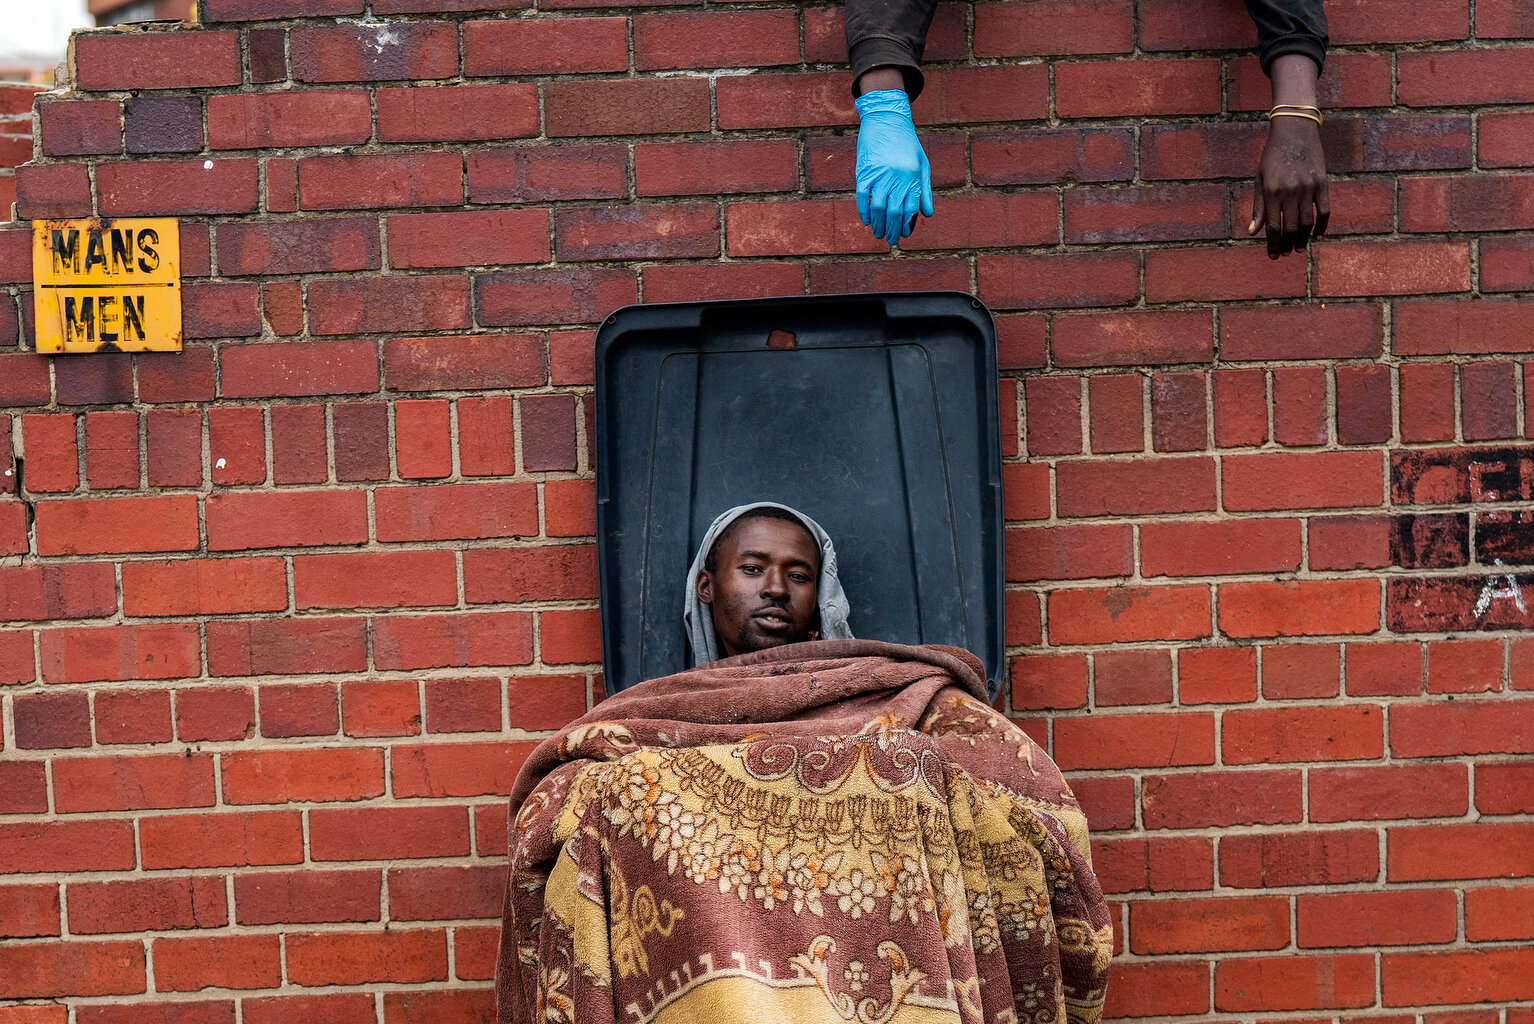  Henry sits in a trash bin as he and other homeless people rest at the Caledonian stadium in downtown Pretoria, South Africa, Thursday April 2, 2020, after being rounded up by police in an effort to enforce a 21-day lockdown to control the spread of 